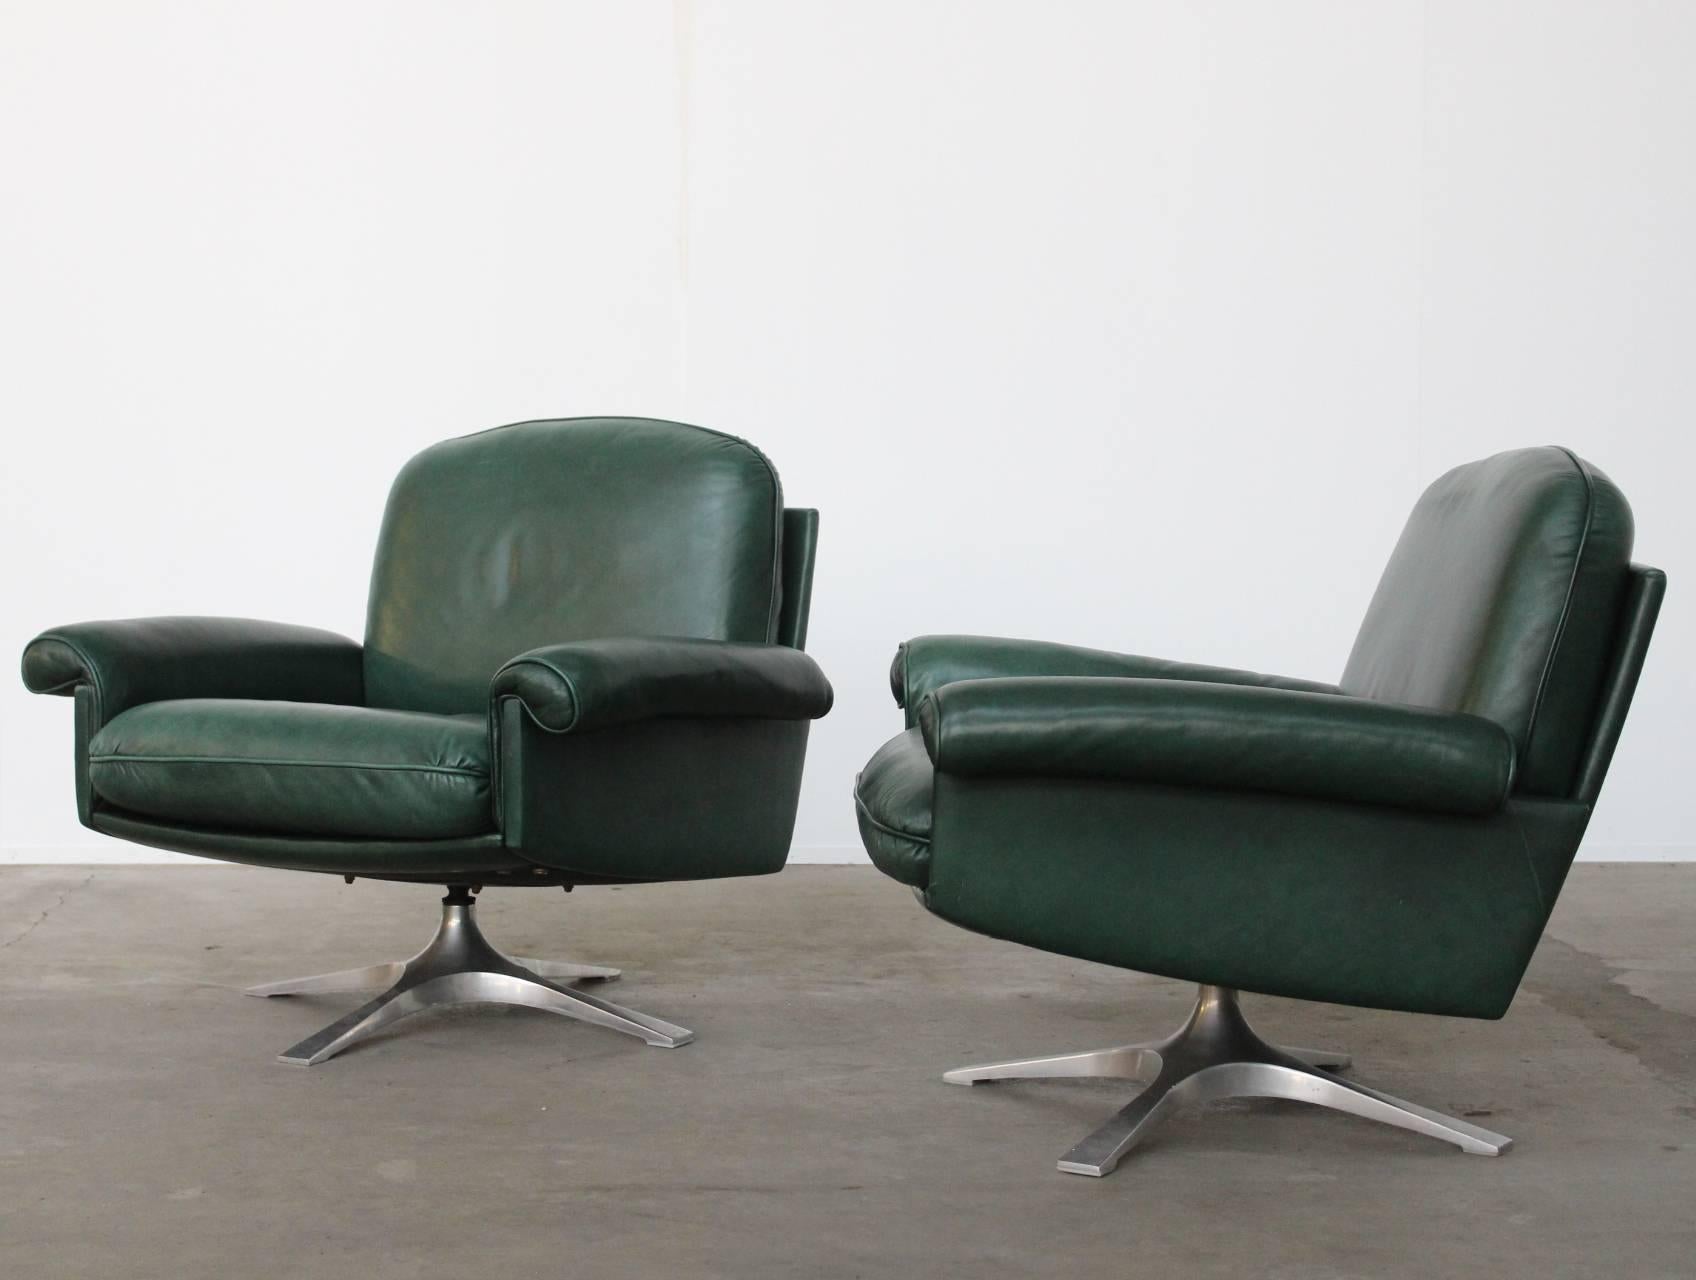 Rare set of green leather arm or lounge chairs model DS-31 by De Sede, Switzerland. This is the model with the beautiful brushed aluminum four leg base. Very comfortable and in excellent condition.